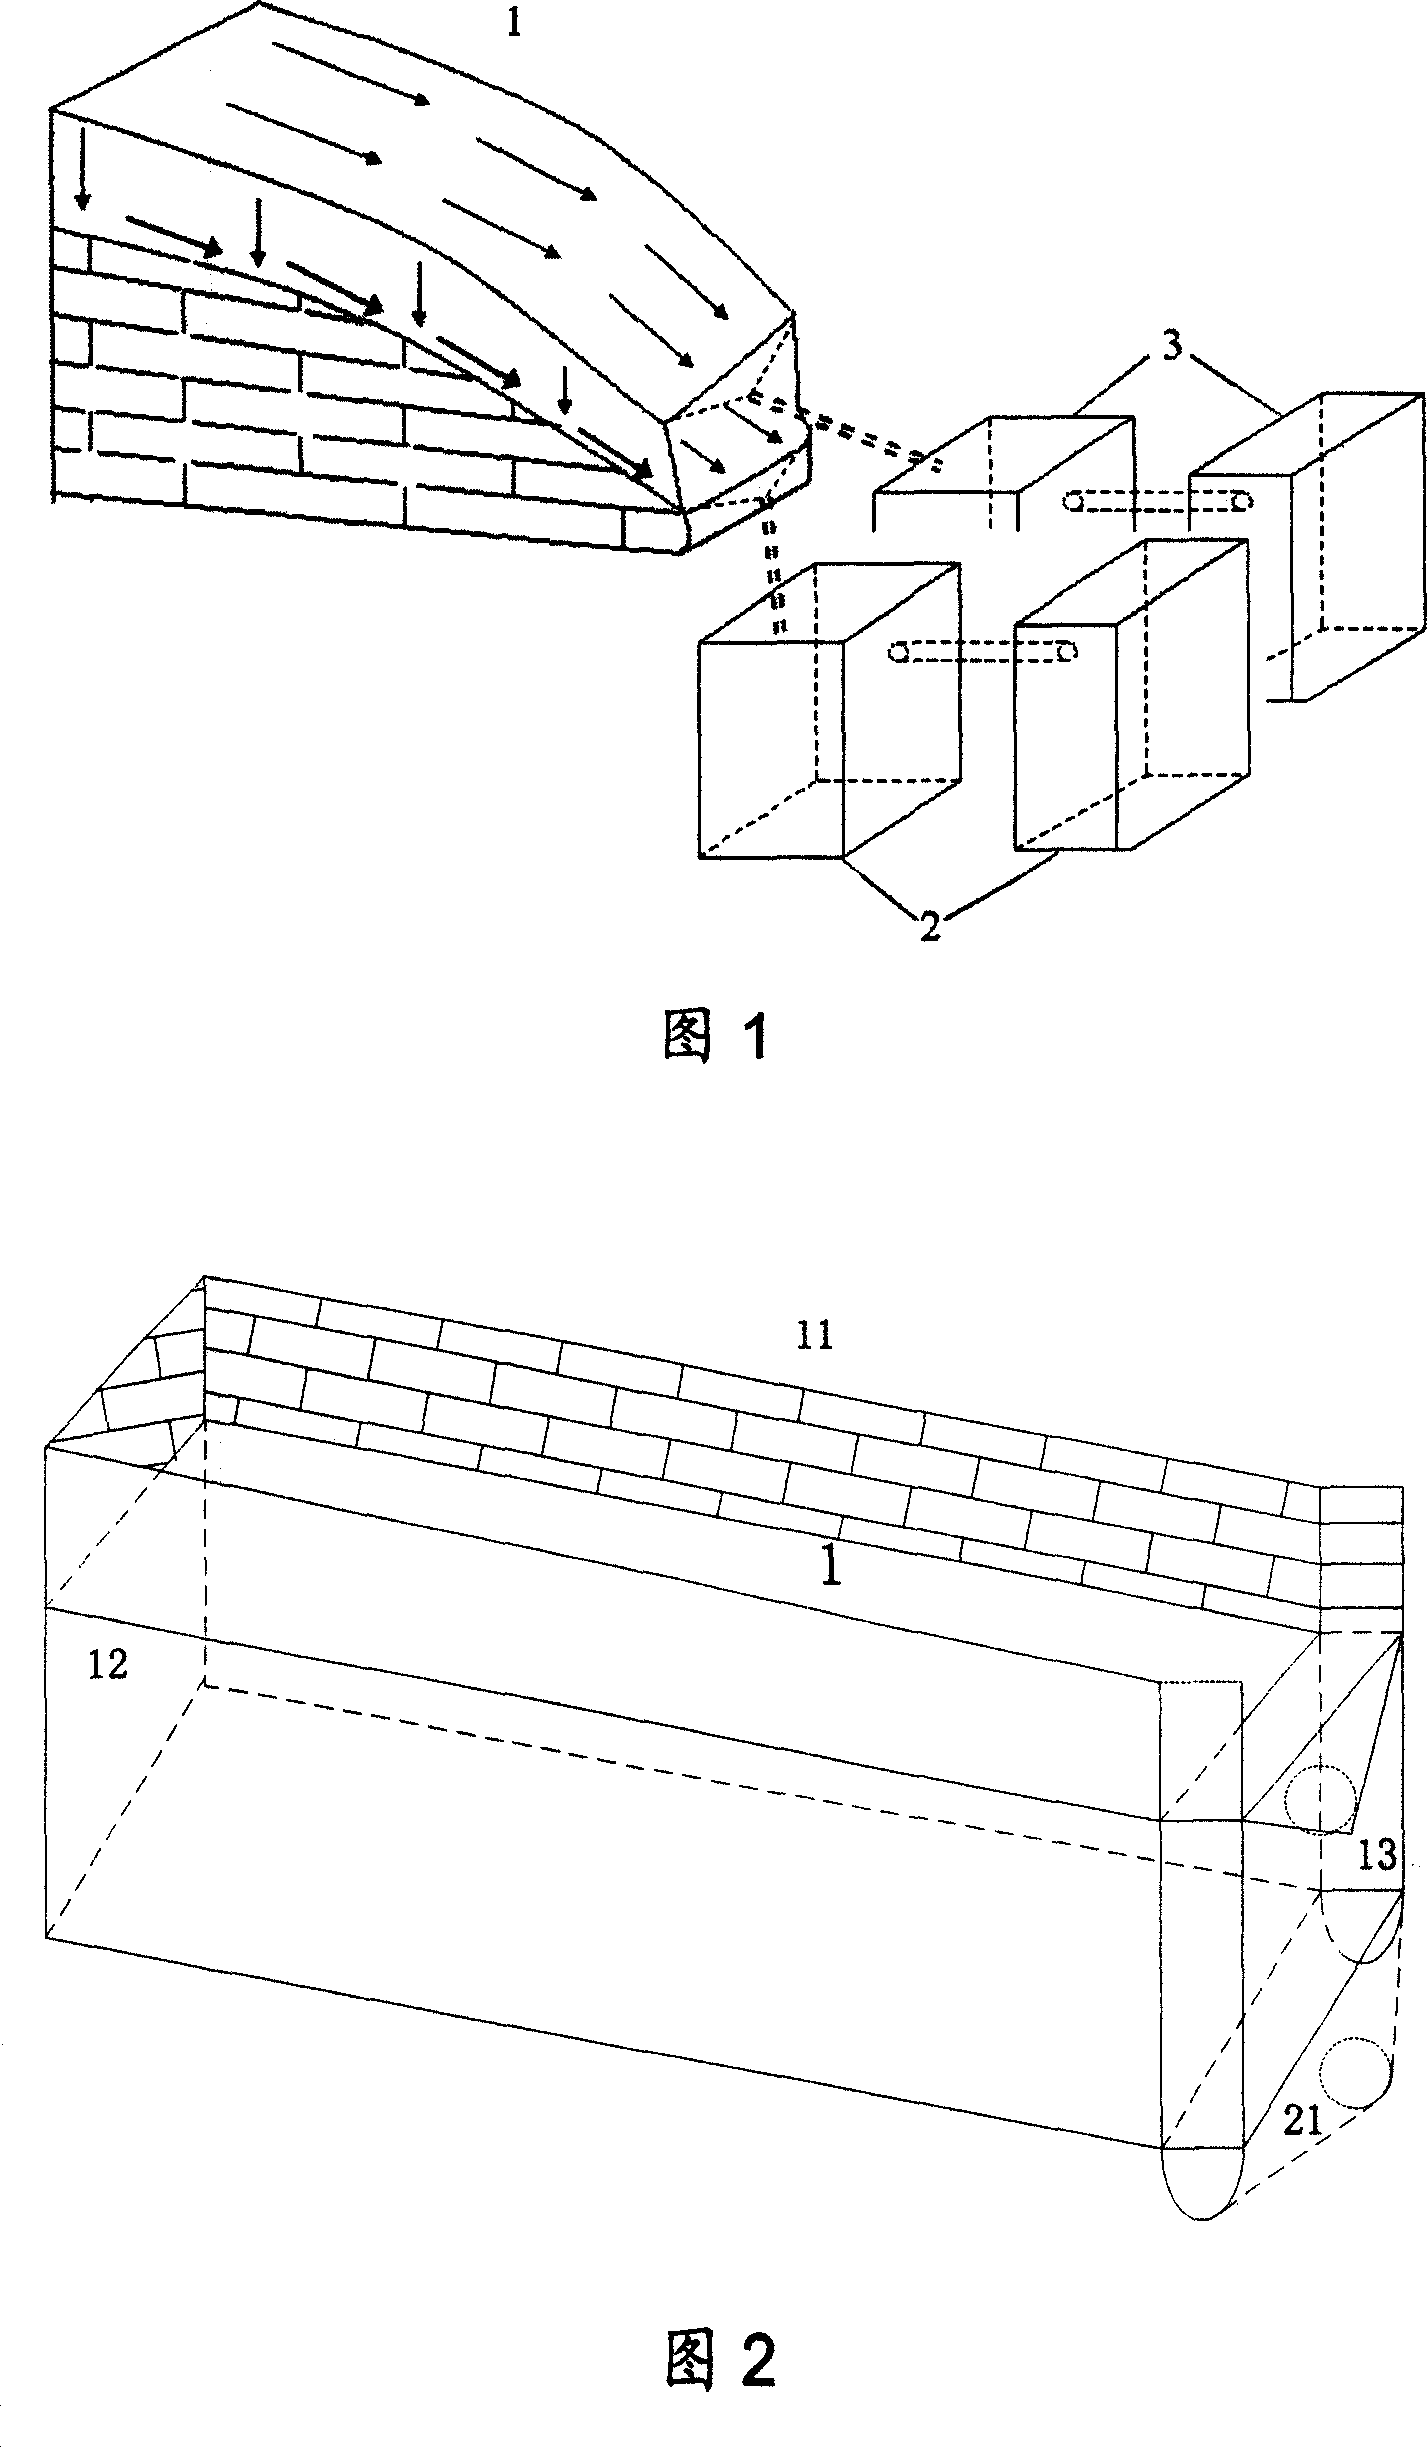 Measurement system for interflow of thin-layer sloping land